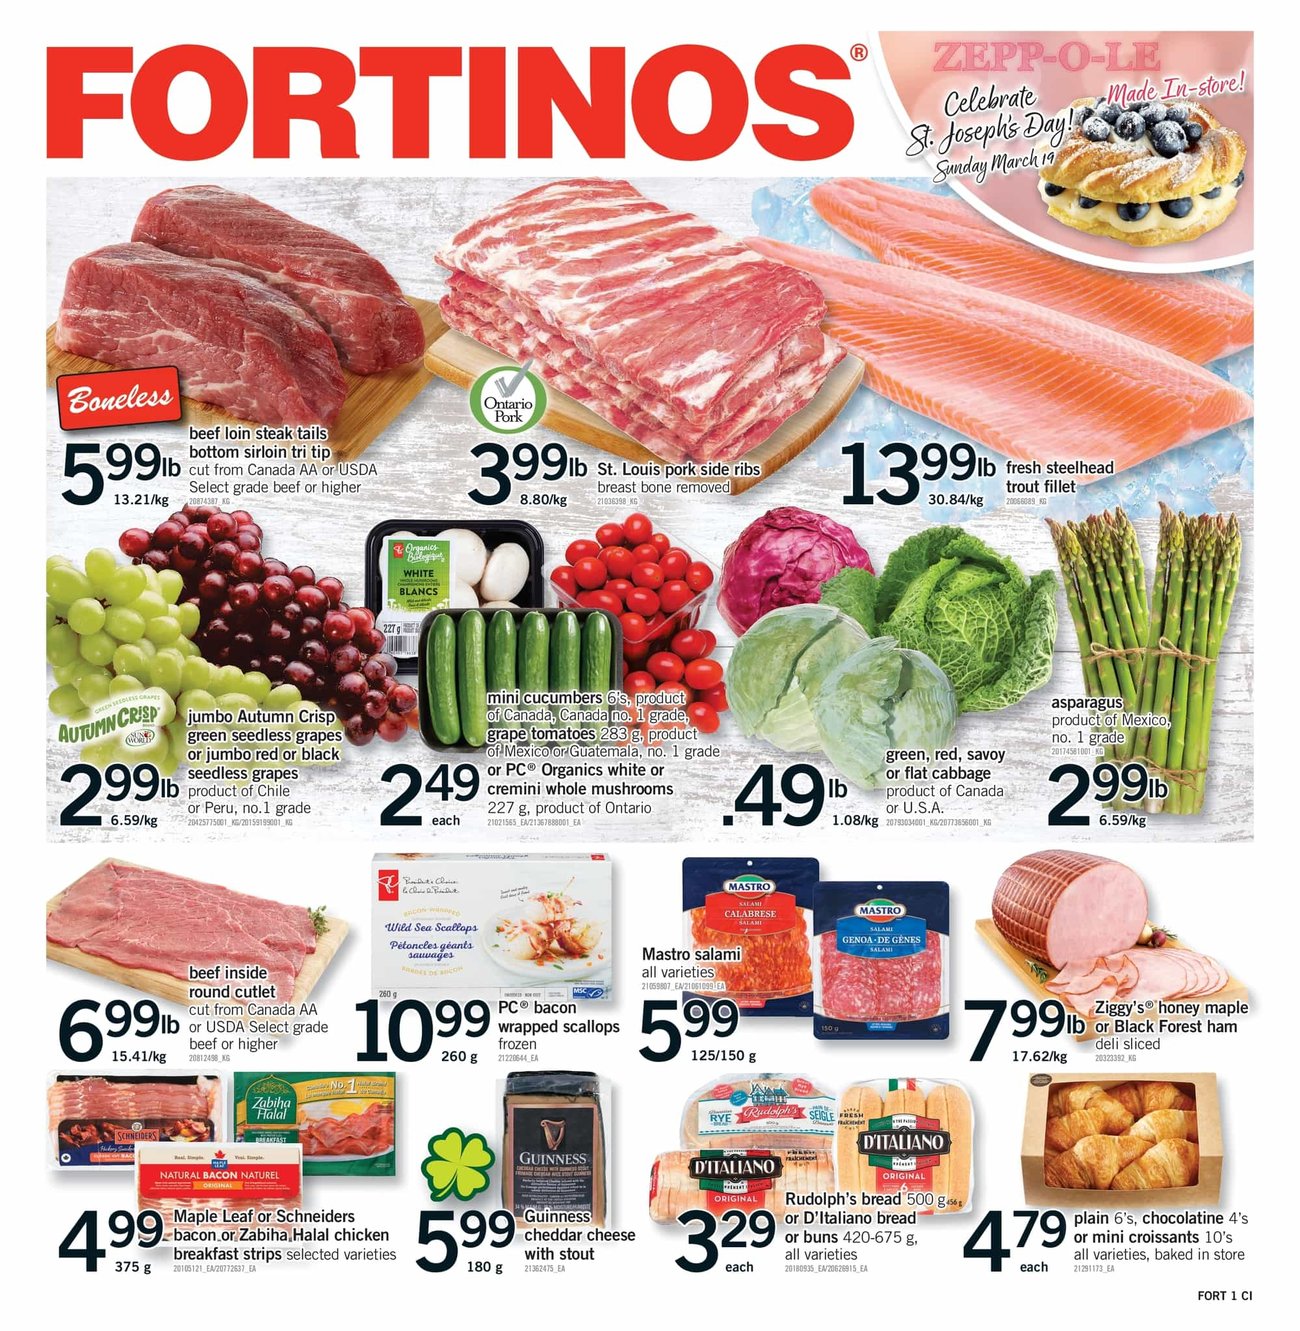 Fortinos - Weekly Flyer Specials - Page 1